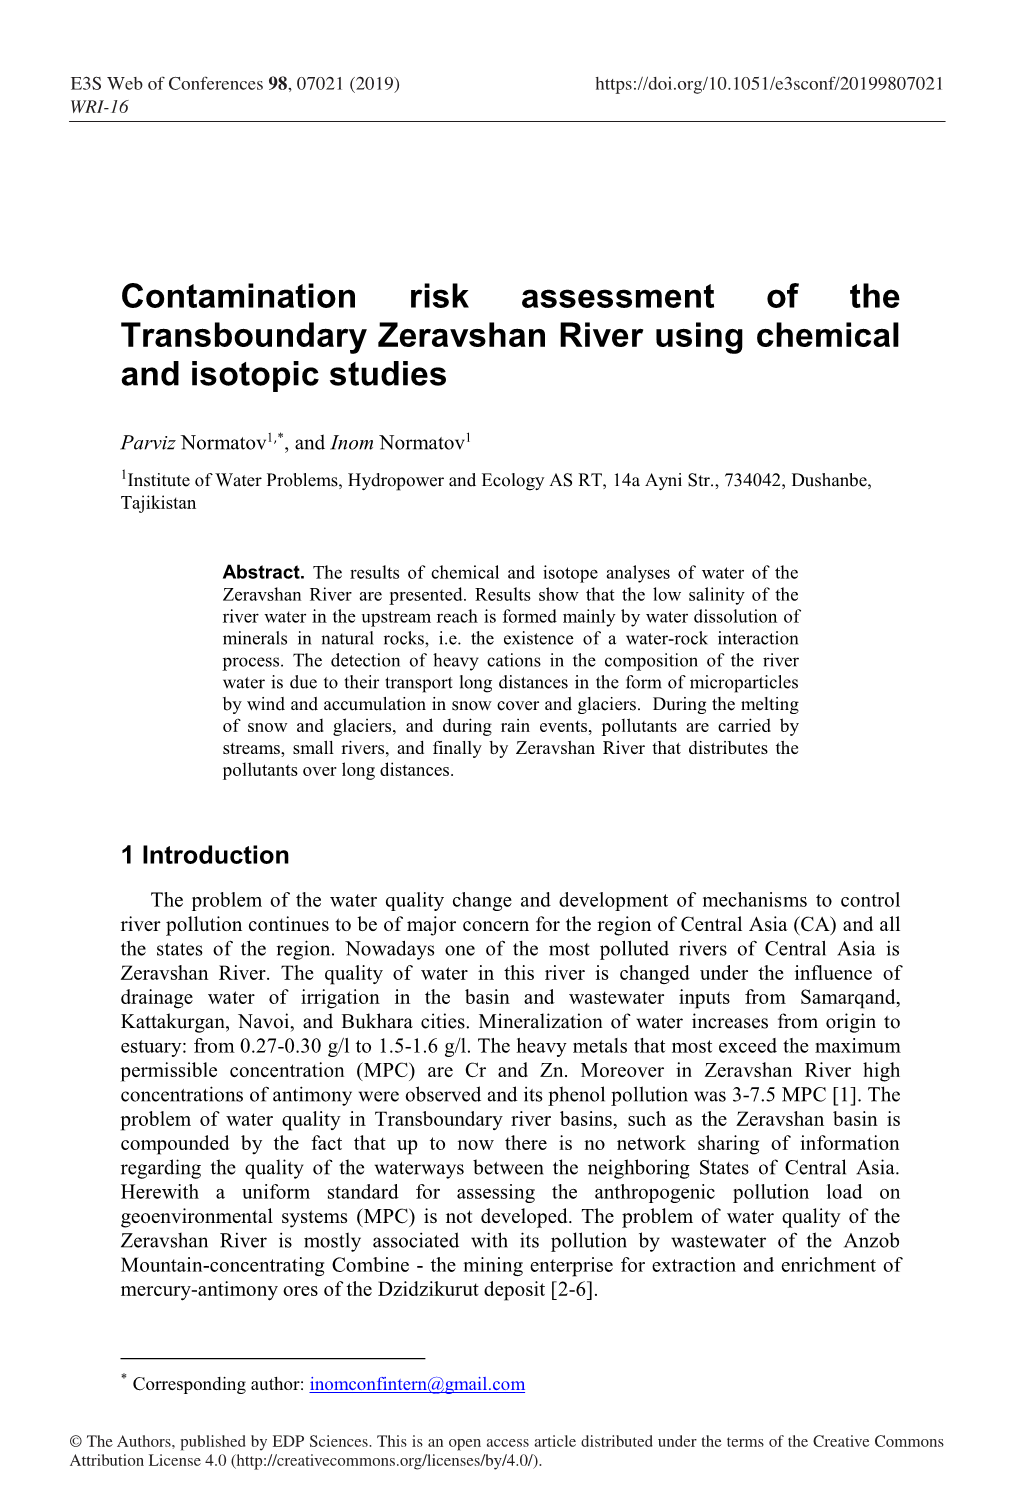 Contamination Risk Assessment of the Transboundary Zeravshan River Using Chemical and Isotopic Studies